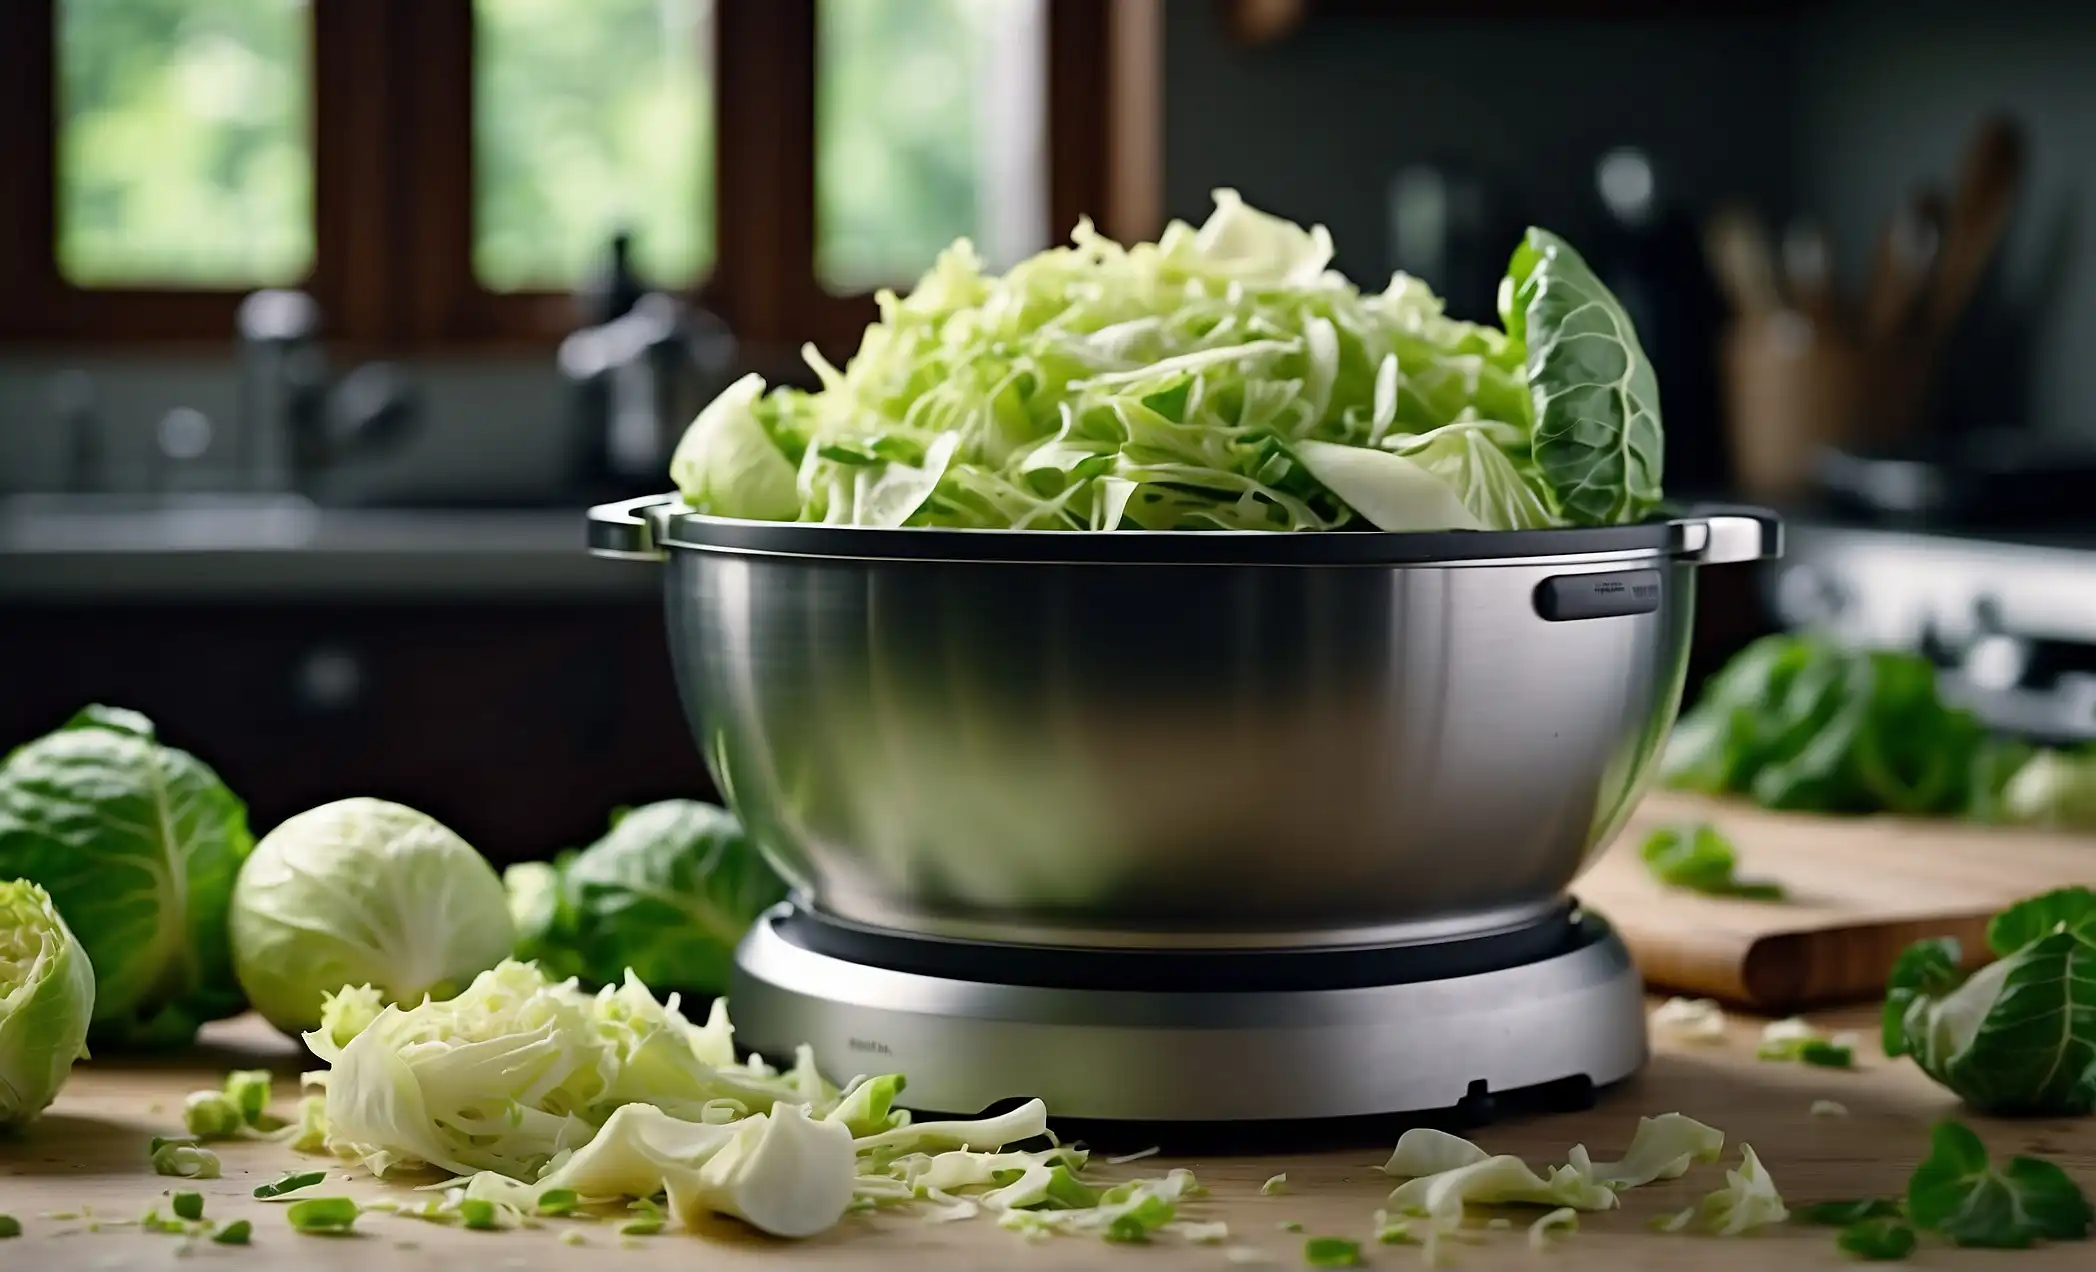 How to Shred Cabbage in Food Processor: Quick Kitchen Tips